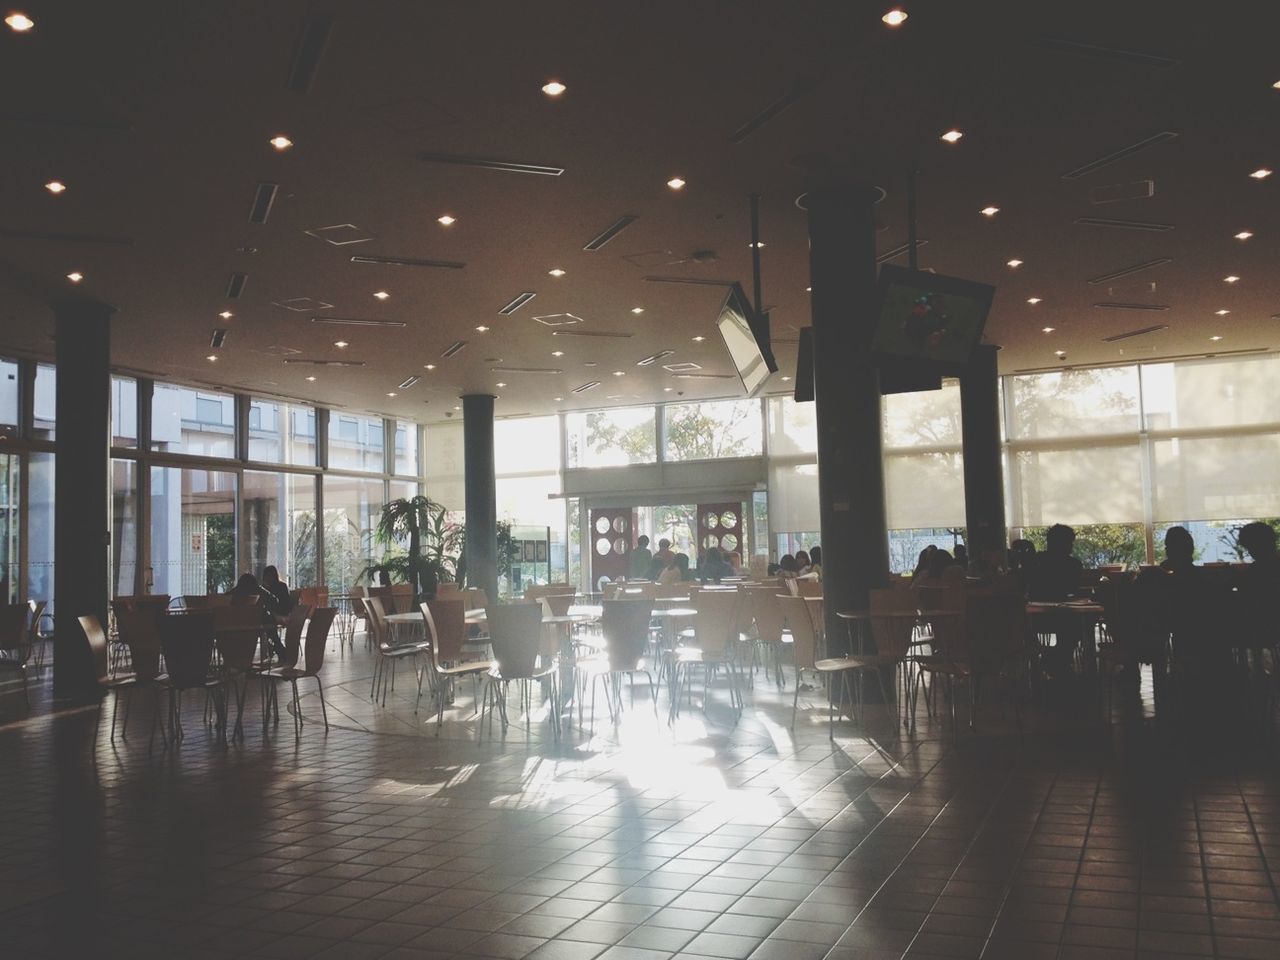 indoors, illuminated, built structure, architecture, chair, table, restaurant, reflection, flooring, glass - material, lighting equipment, window, night, empty, incidental people, silhouette, architectural column, ceiling, sunlight